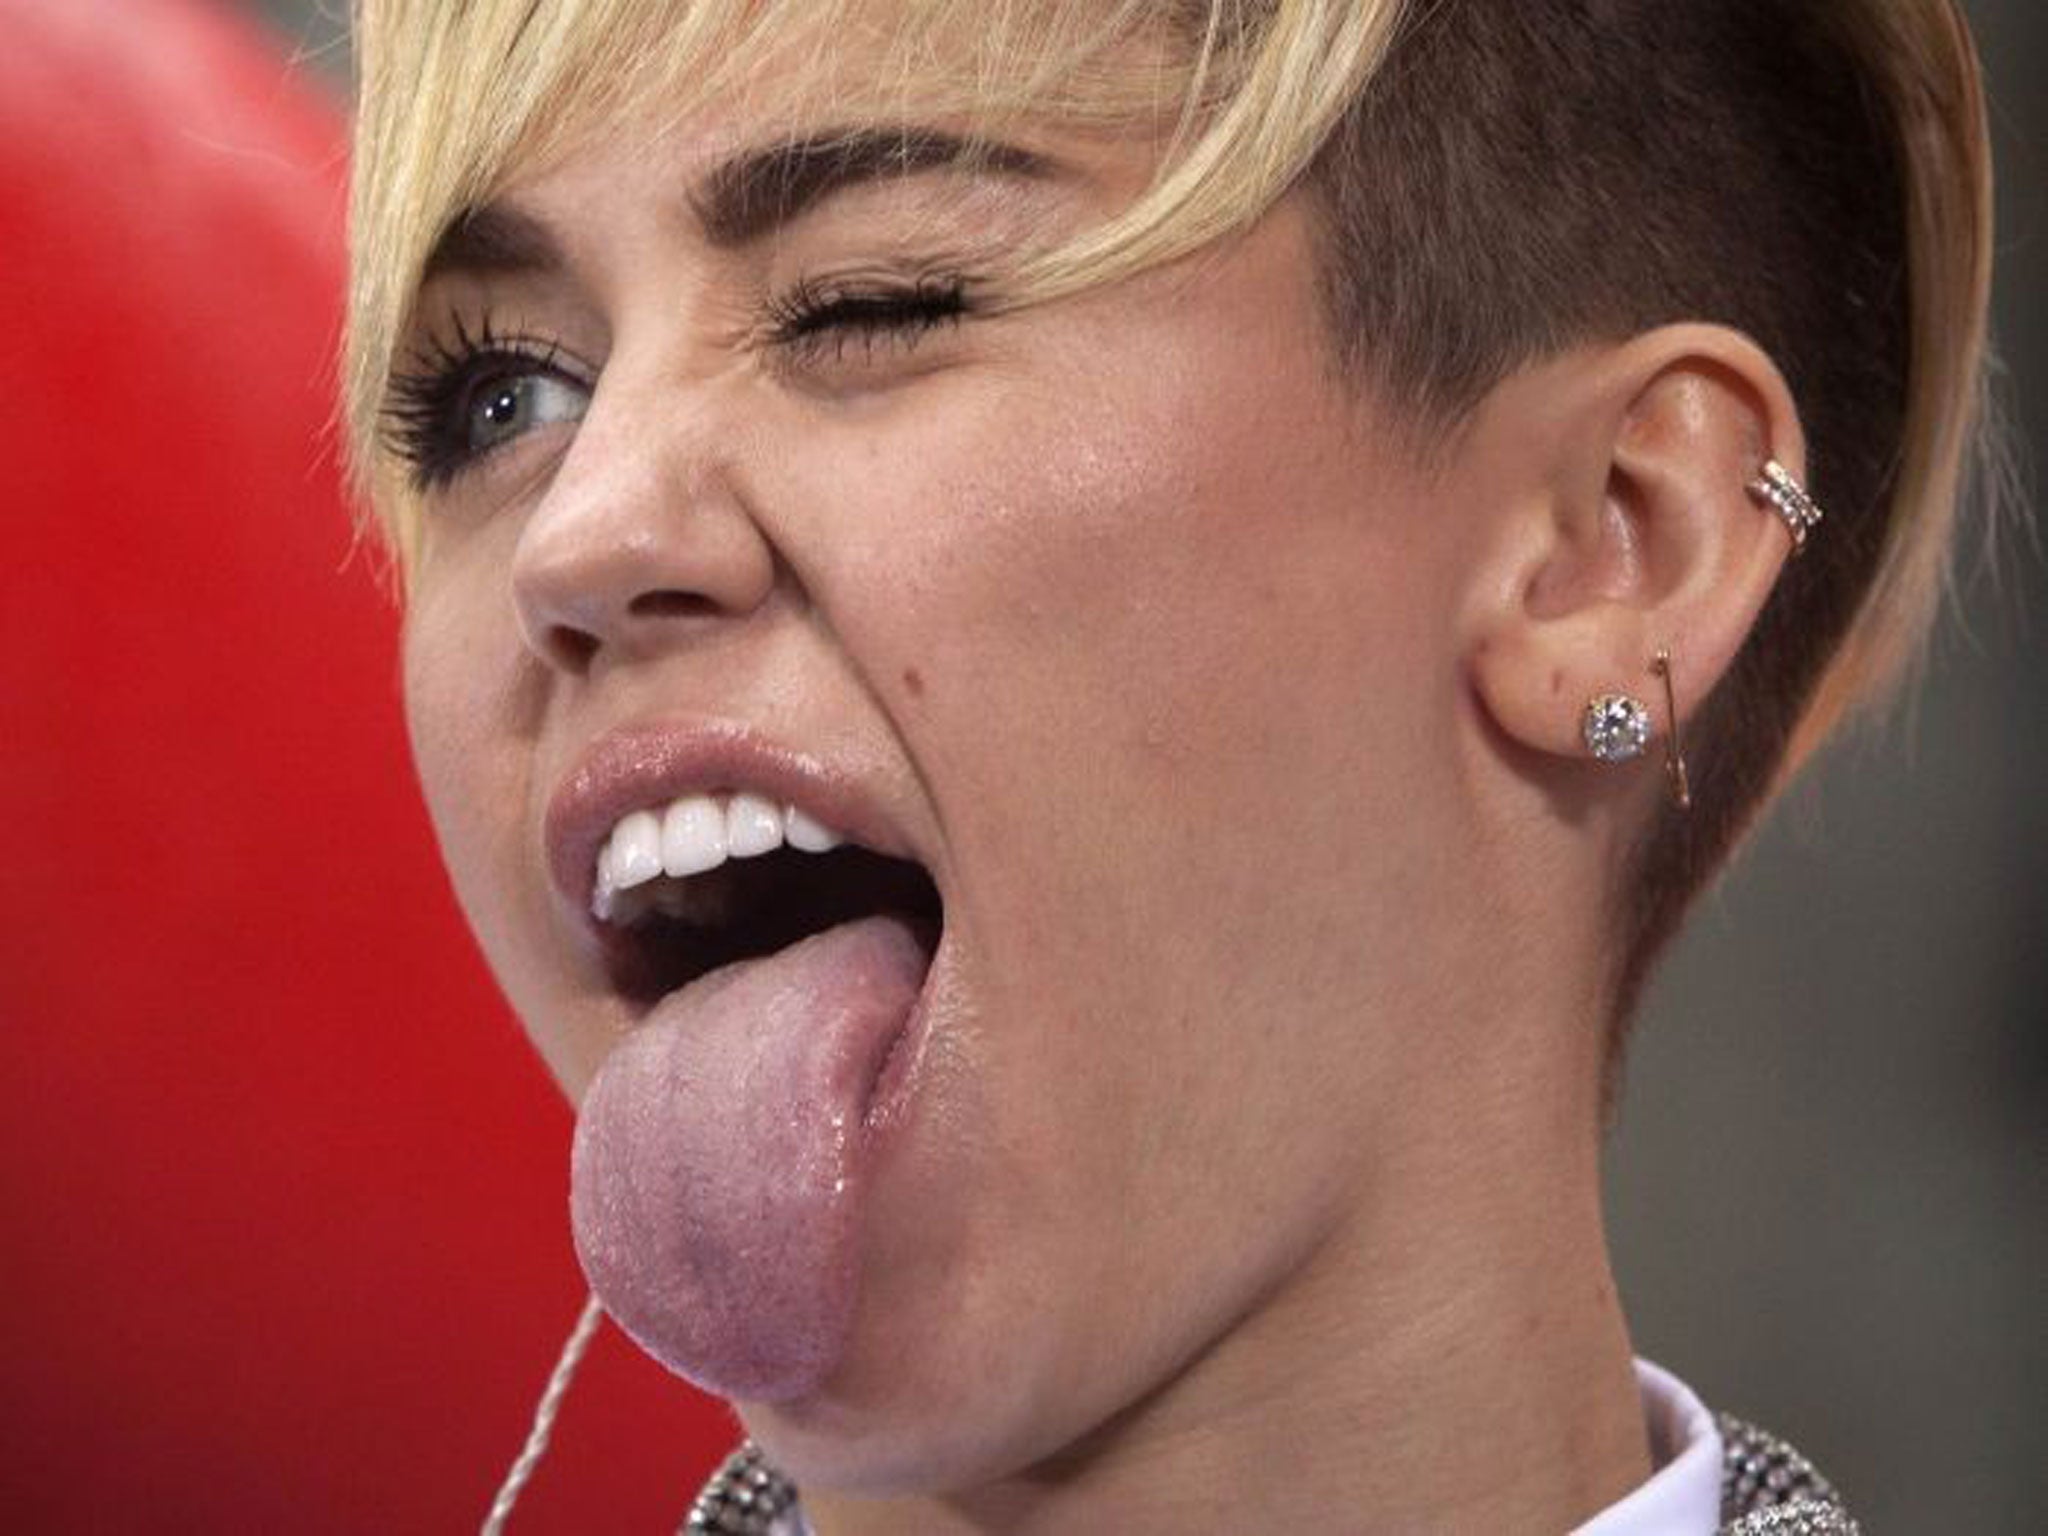 Miley Please - From Sinead O'Connor and Annie Lennox to Miley Cyrus and ...